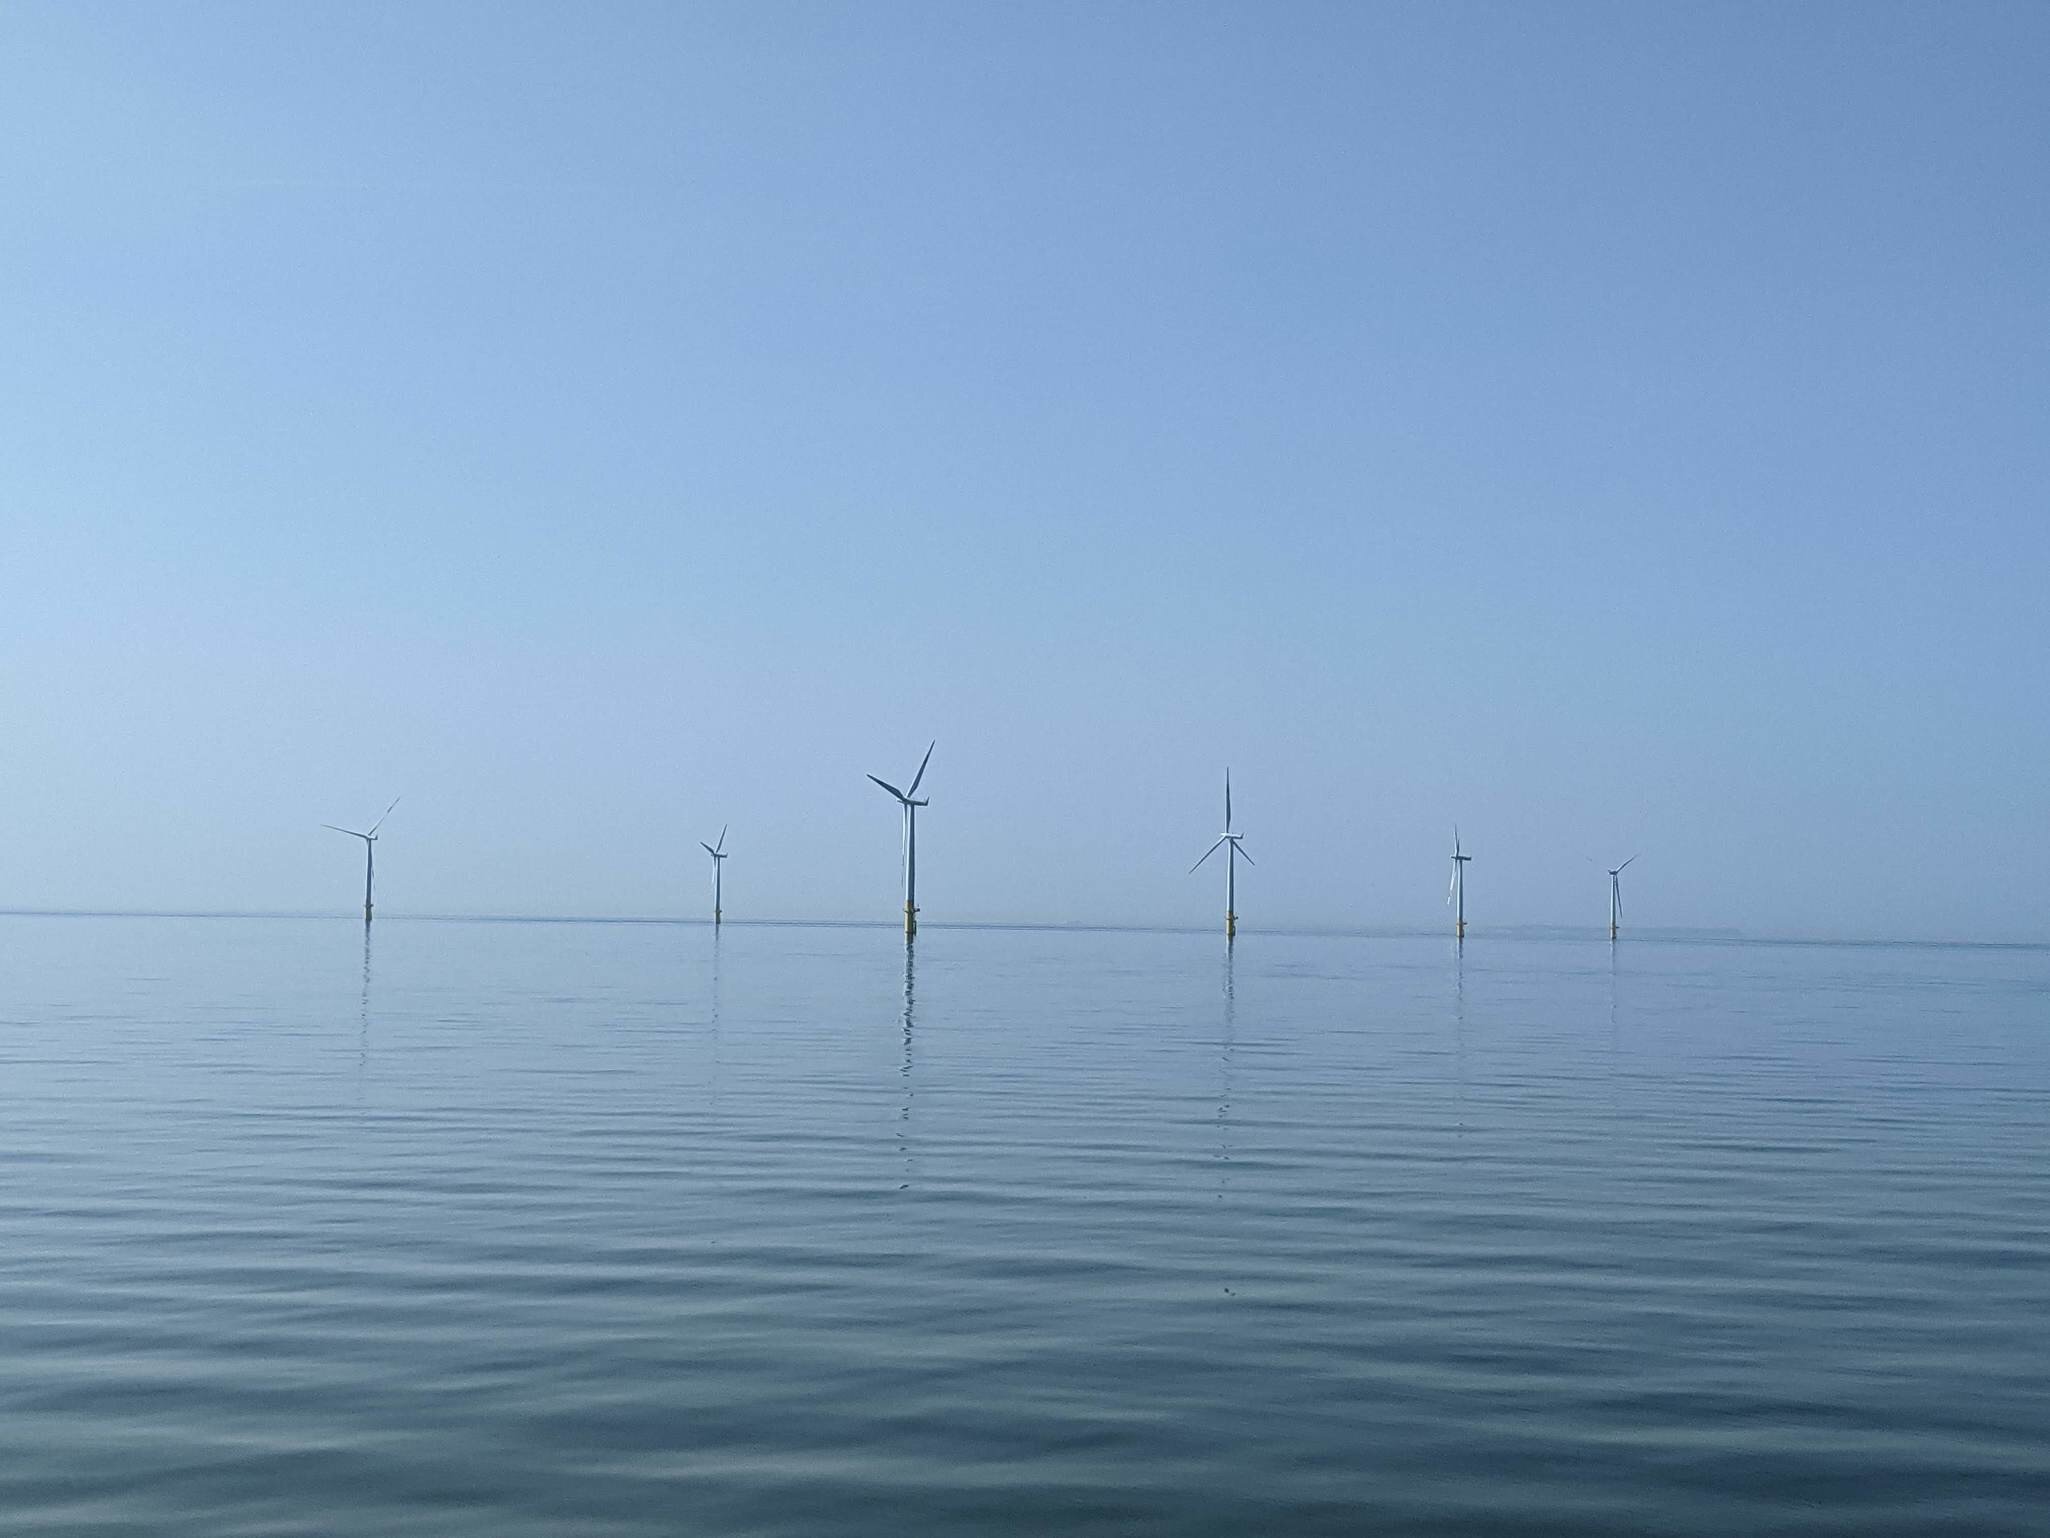 Taken from Jack-Up JB-119. This photo captured the wind turbines in daylight when the sky and sea have the same colour tone